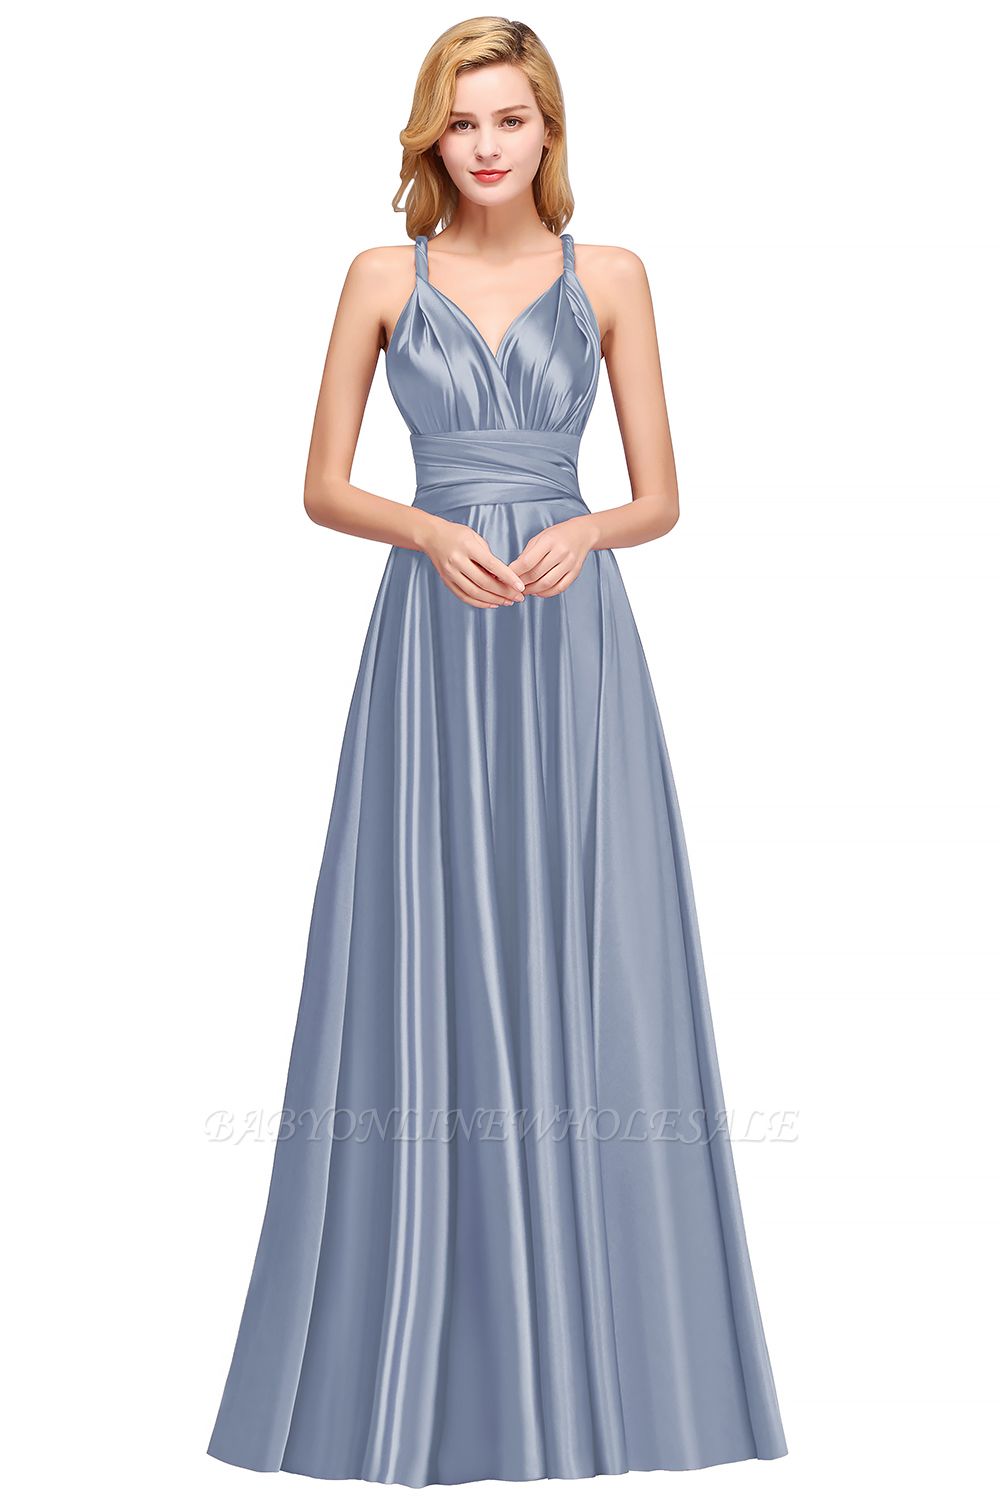 Bridesmaid dresses infinity dresses convertible gowns